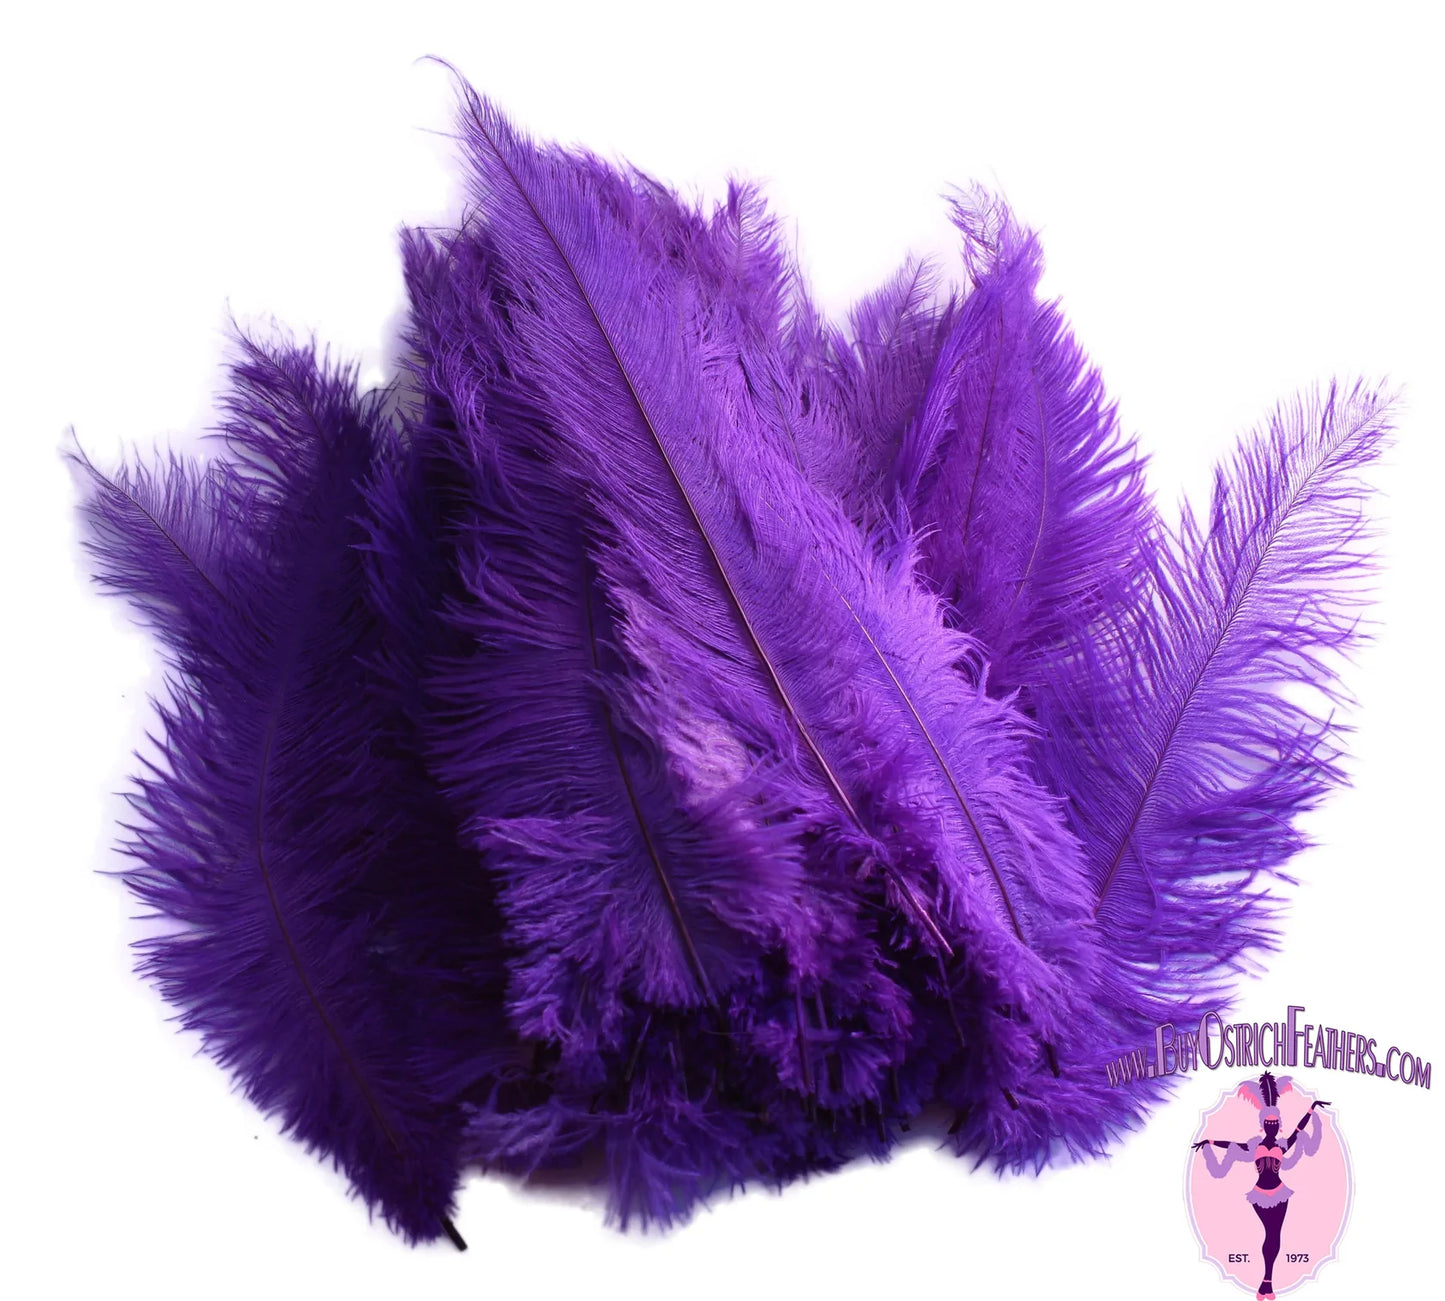 Ostrich Feather Rental 16-20" (Purple) - 250pcs - Buy Ostrich Feathers